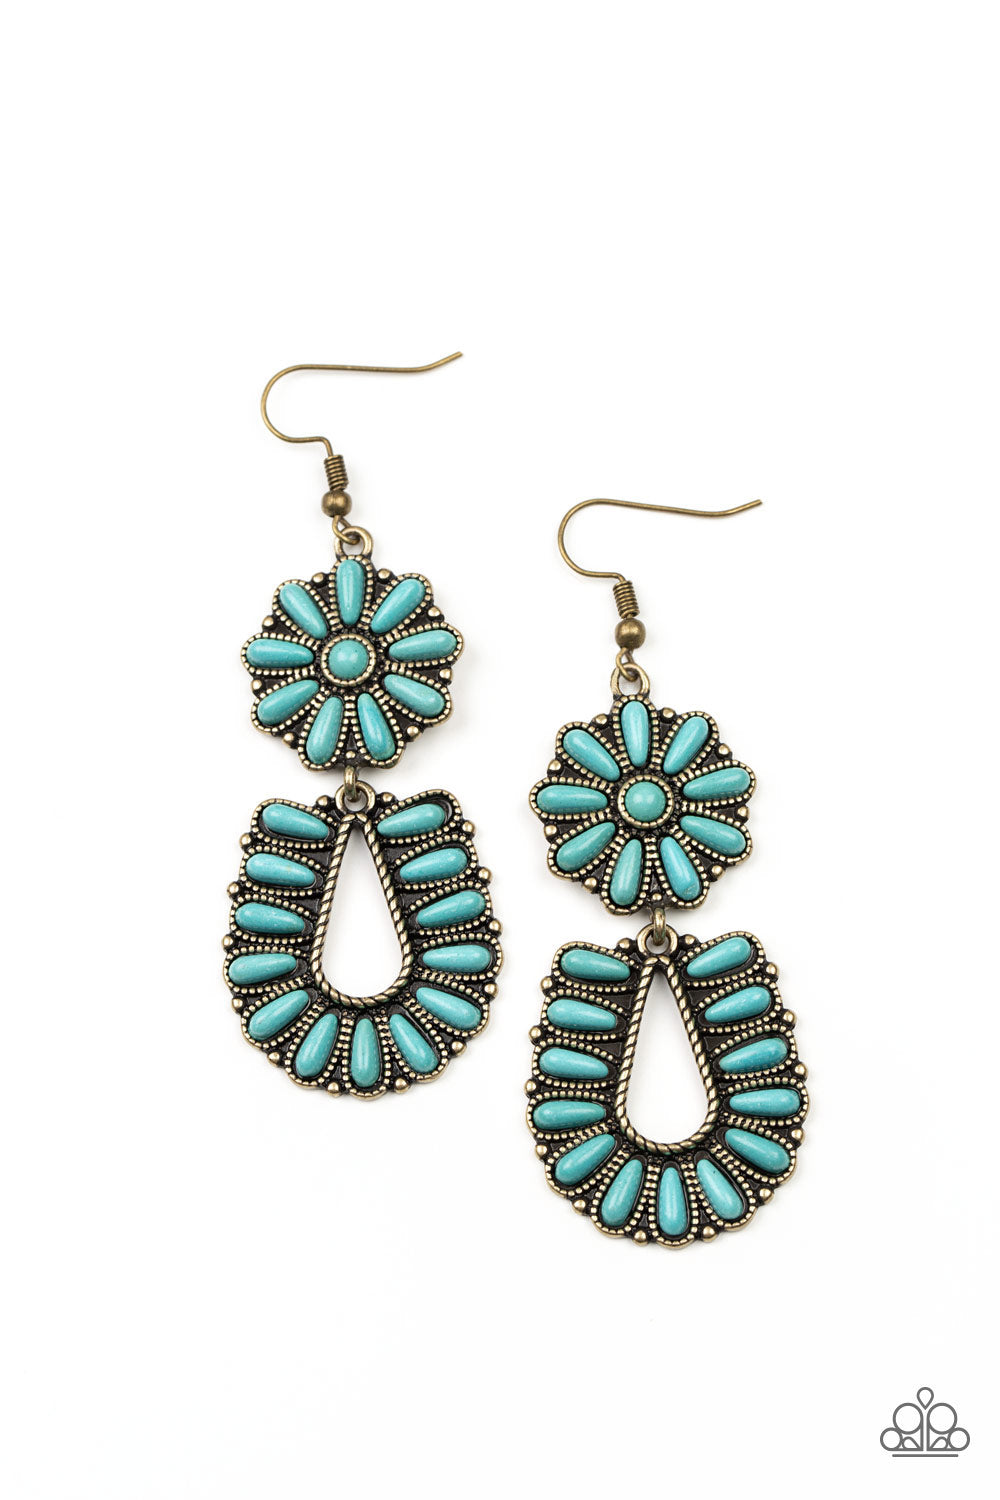 Paparazzi Accessories Badlands Eden - Brass Earrings infused with studded brass fittings, two turquoise stone frames connect into a squash blossom for an authentically southwestern inspired look. Earring attaches to a standard fishhook fitting.